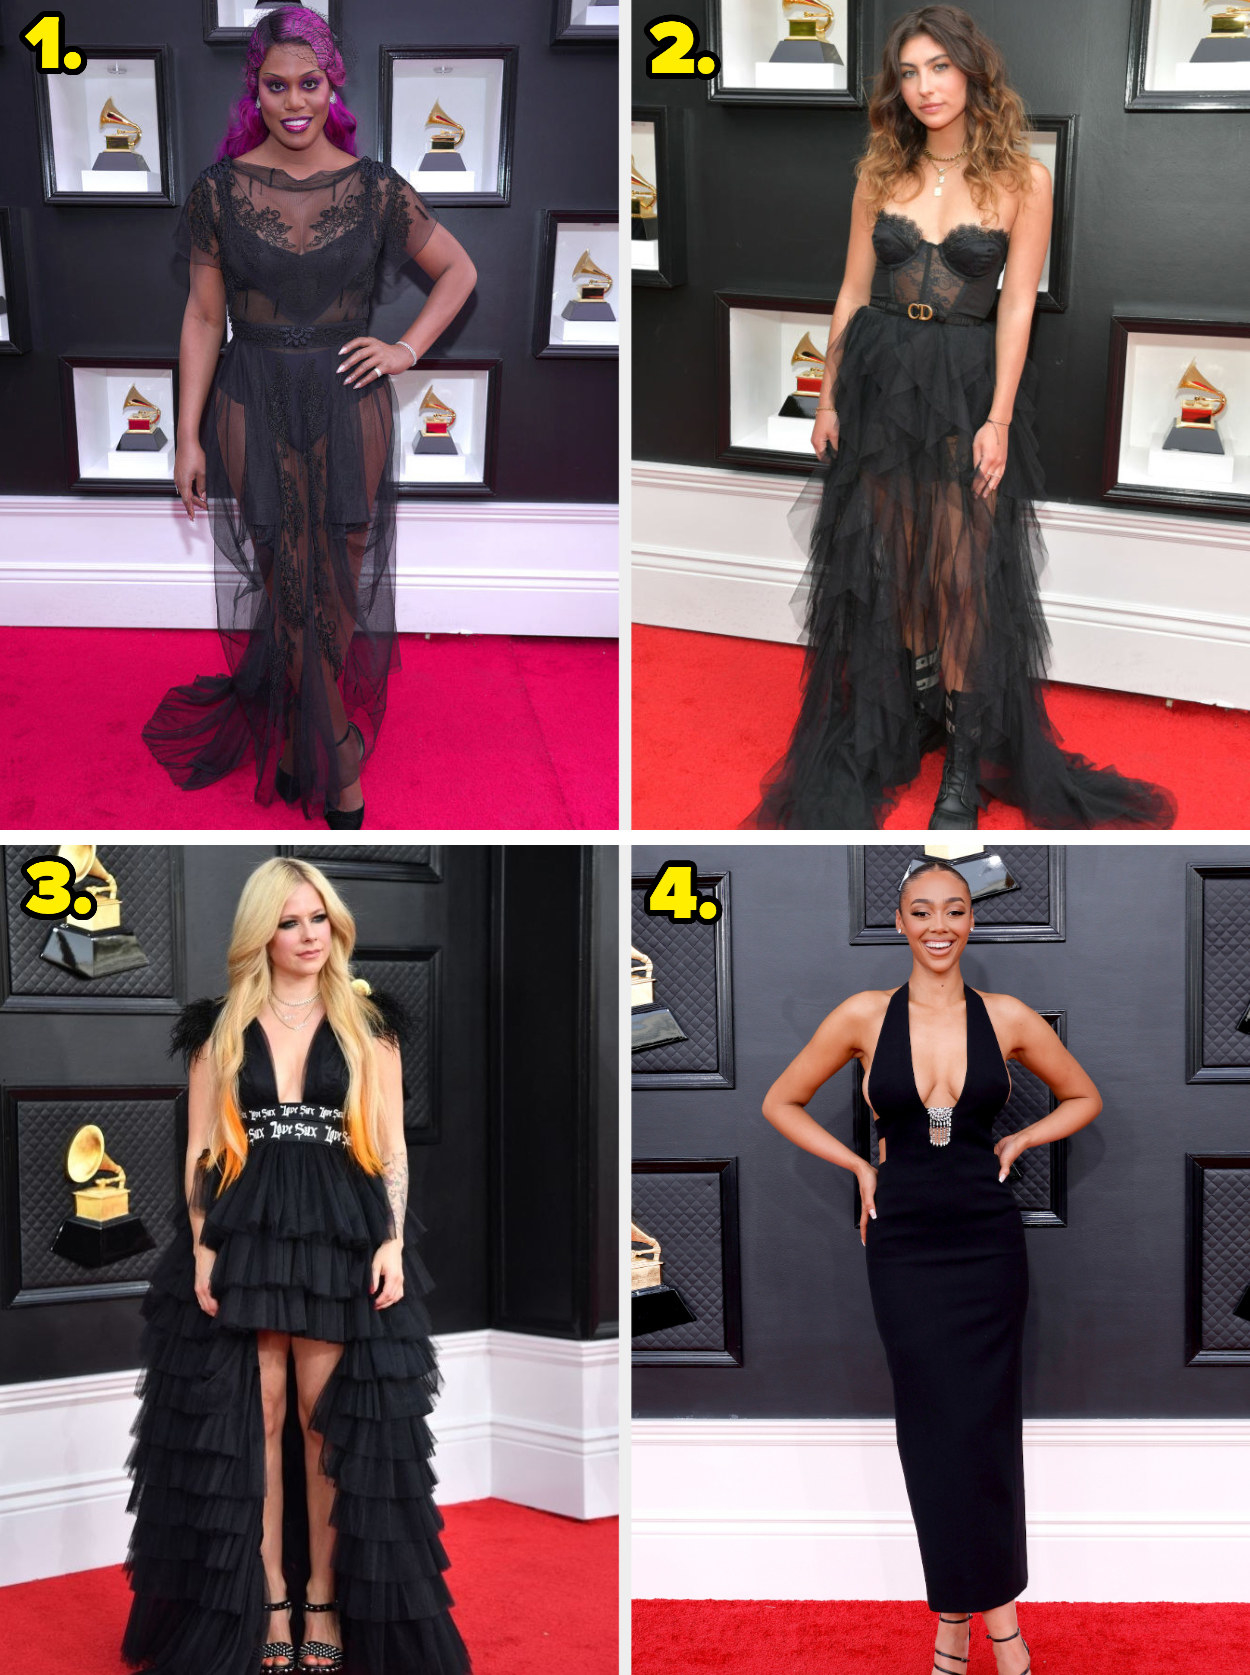 1. A sheer gown with patterned lace and tulle. 2. A corset gown with a sheer asymmetric skirt and combat boots. 3. A gown with feathered cap sleeves and a tiered, ruffled high-low skirt. 4. A halter gown with some silver detailing.